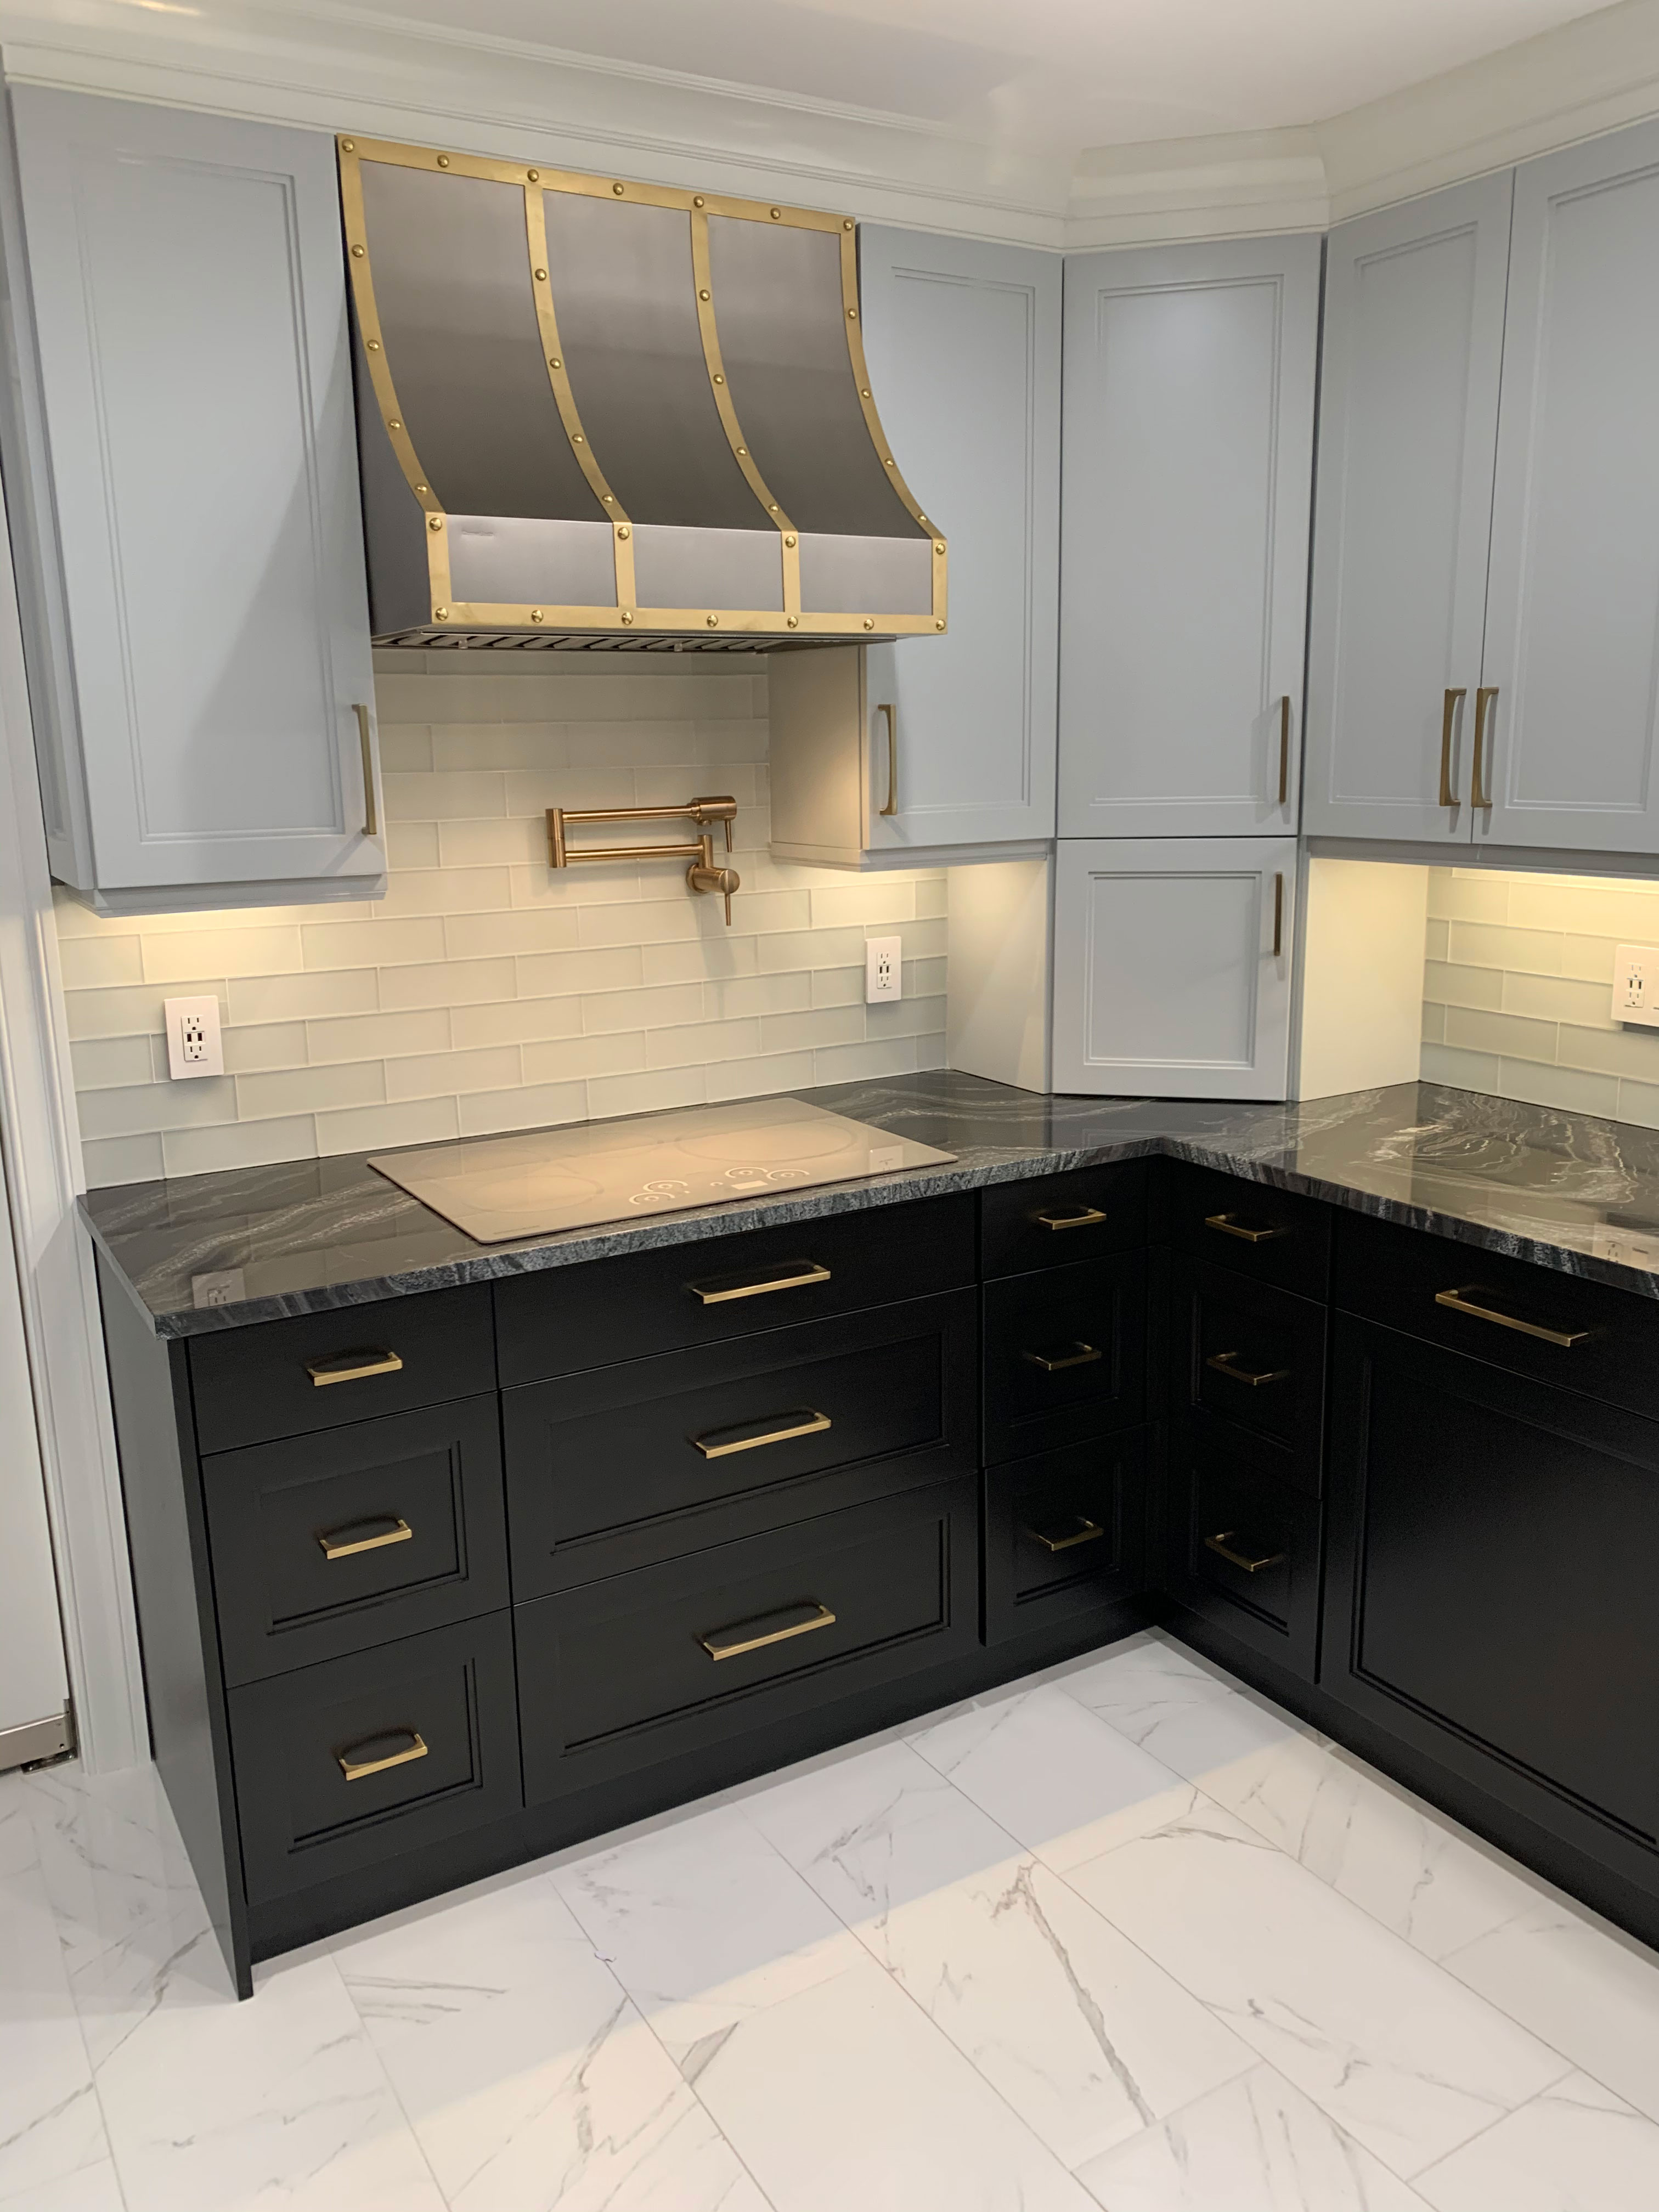 Classic kitchen design featuring black kitchen cabinets and countertops with a brick backsplash, complemented by a stylish range hood